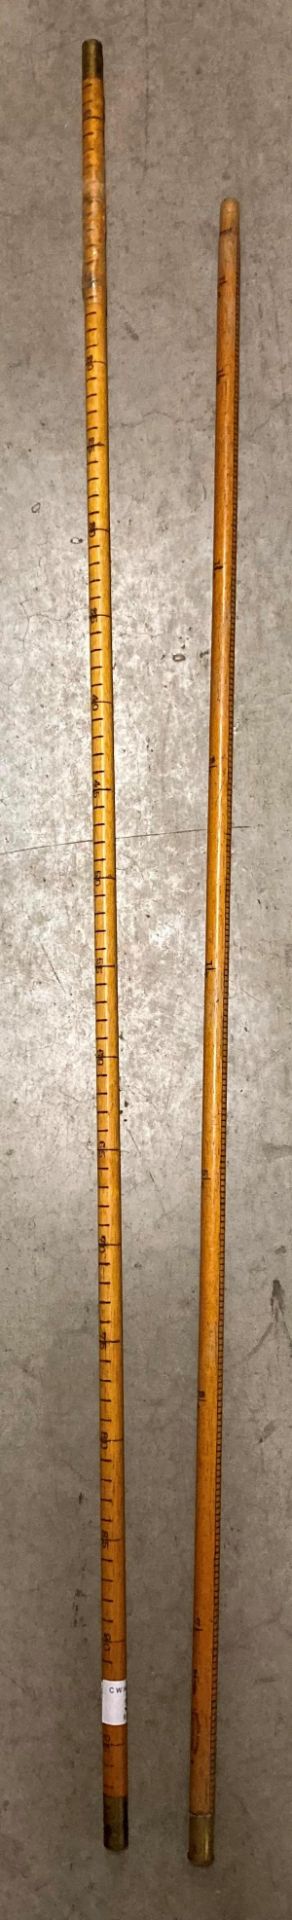 Two Rabone tubular wooden rulers, 1 metre and 1 yard (metre one is cracked,